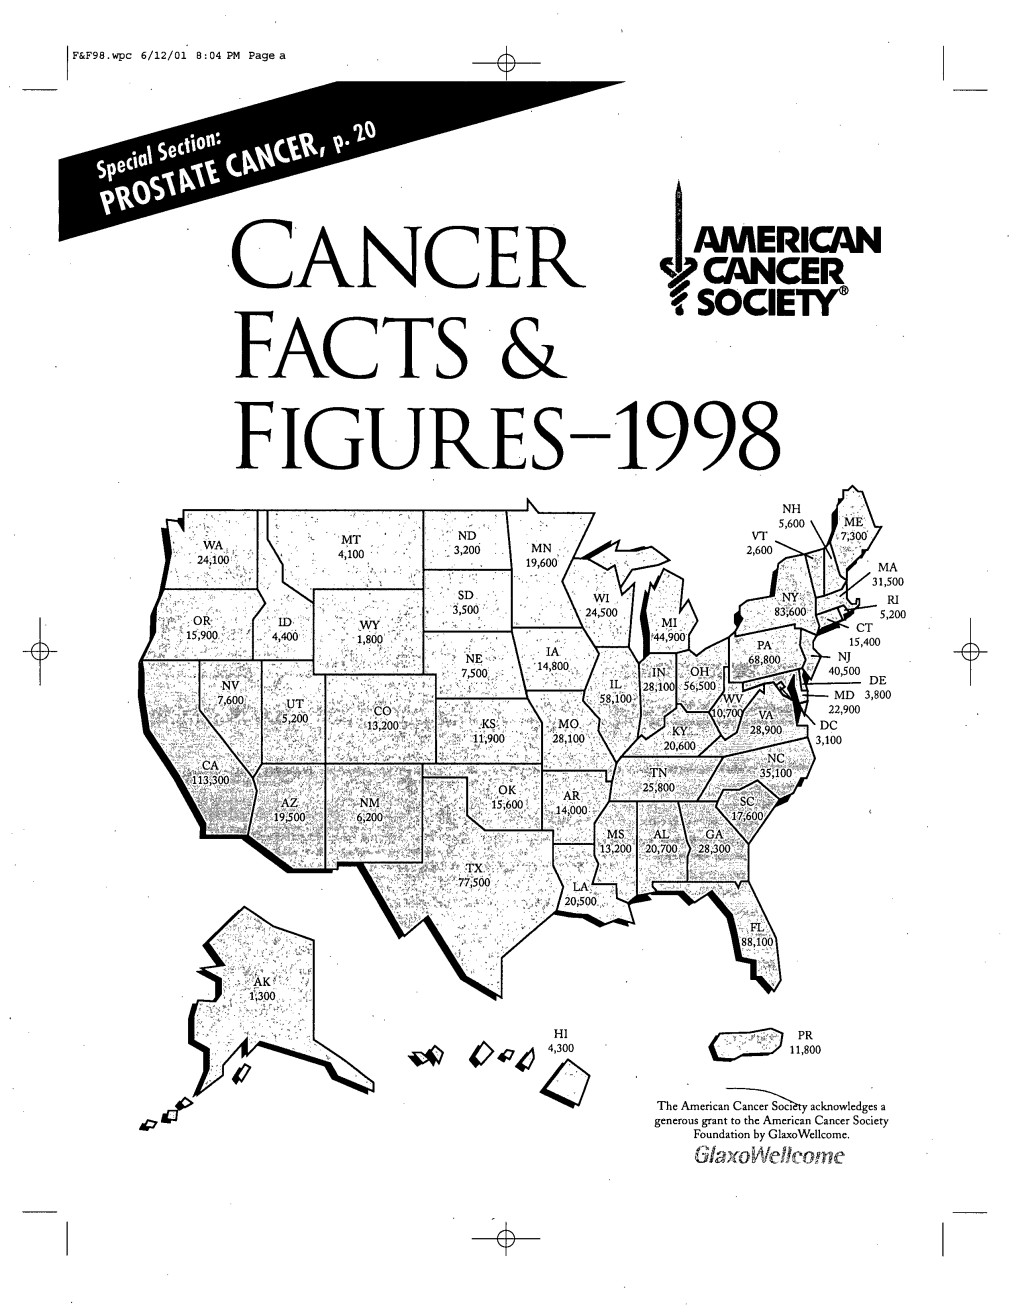 American Cancer Society, Cancer Facts & Figures-1998